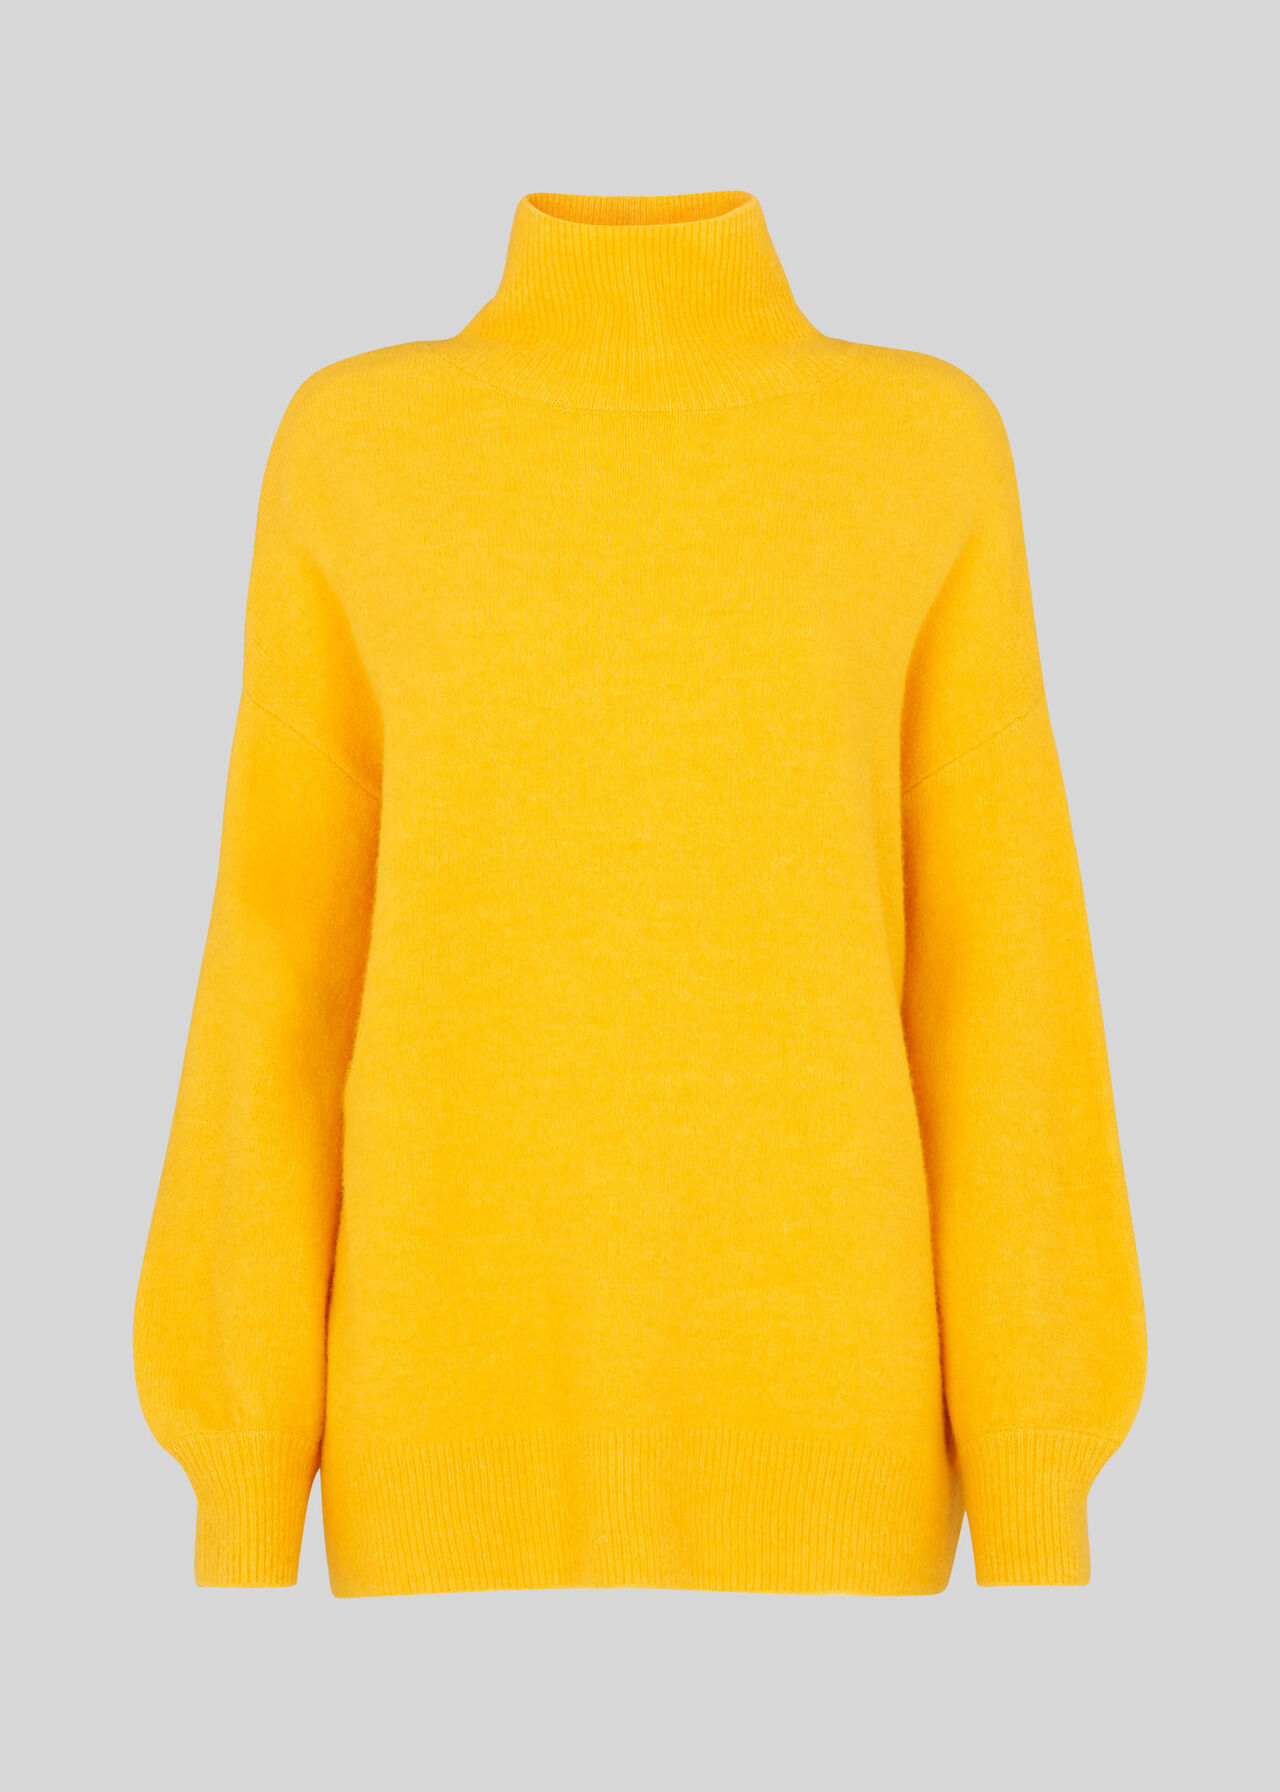 Oversized Funnel Neck Knit Yellow